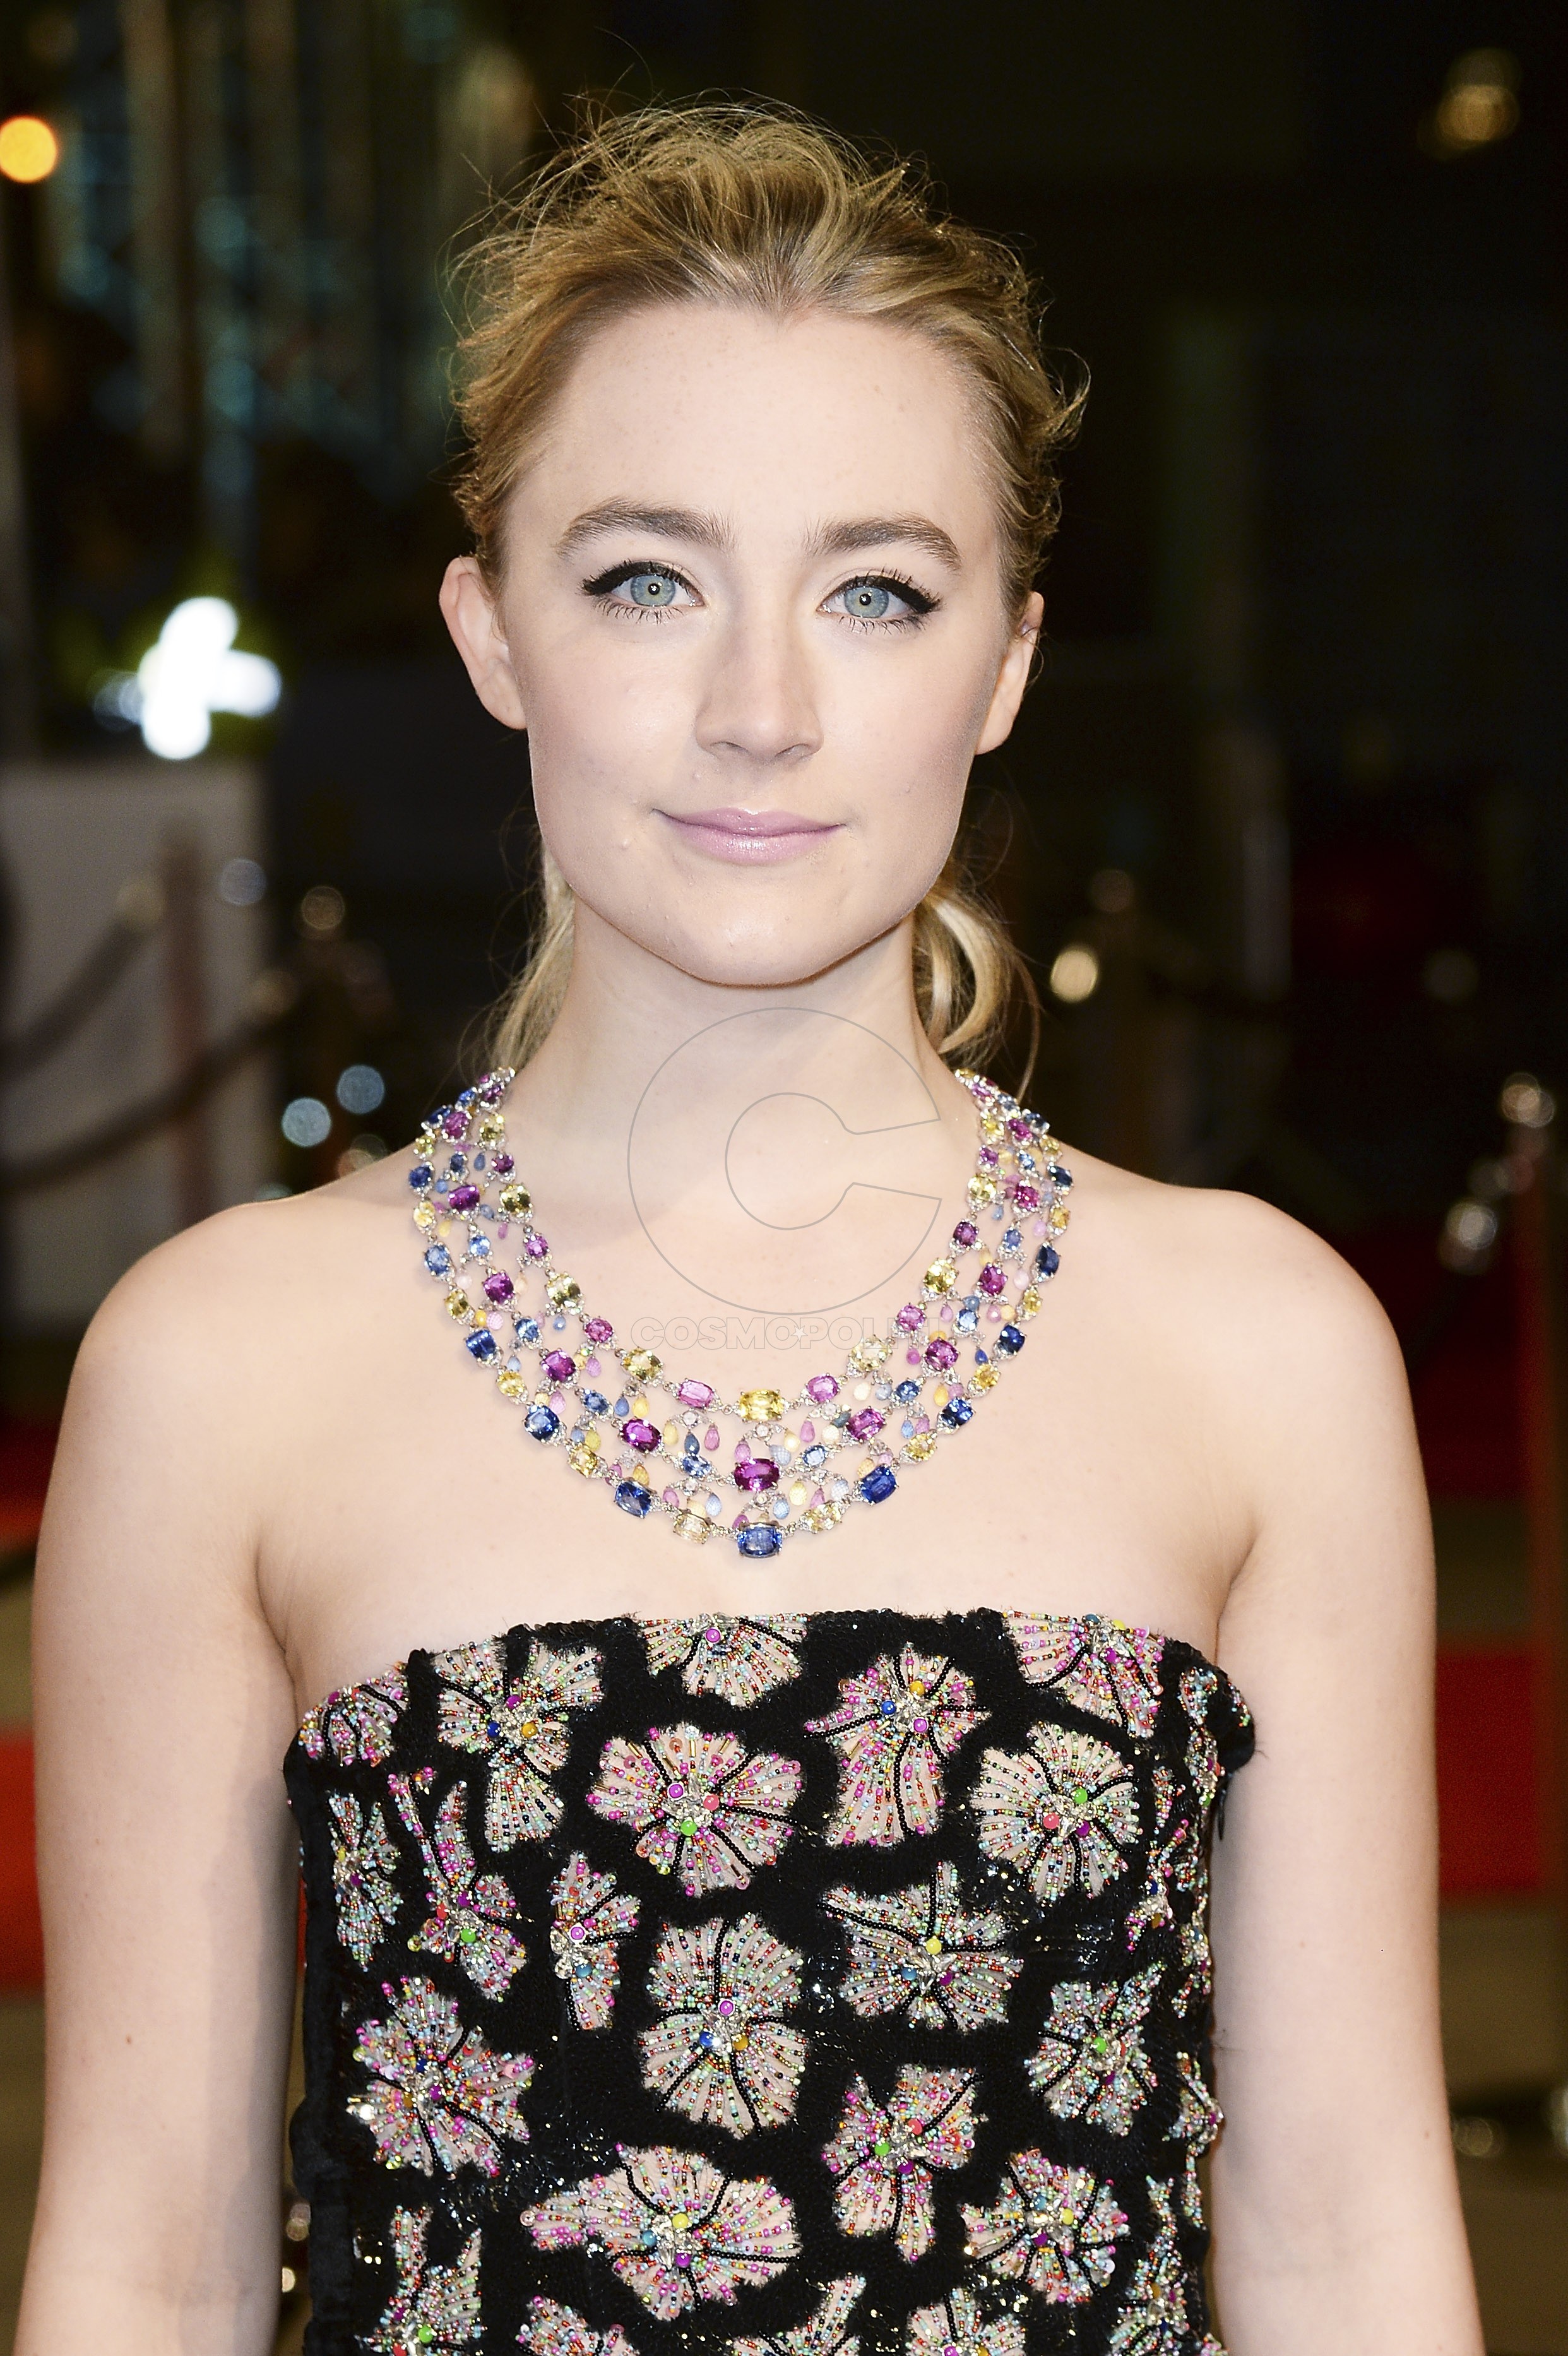 LONDON, ENGLAND - FEBRUARY 14: Saoirse Ronan attends the EE British Academy Film Awards at The Royal Opera House on February 14, 2016 in London, England. (Photo by Dave J Hogan/Dave J Hogan/Getty Images)